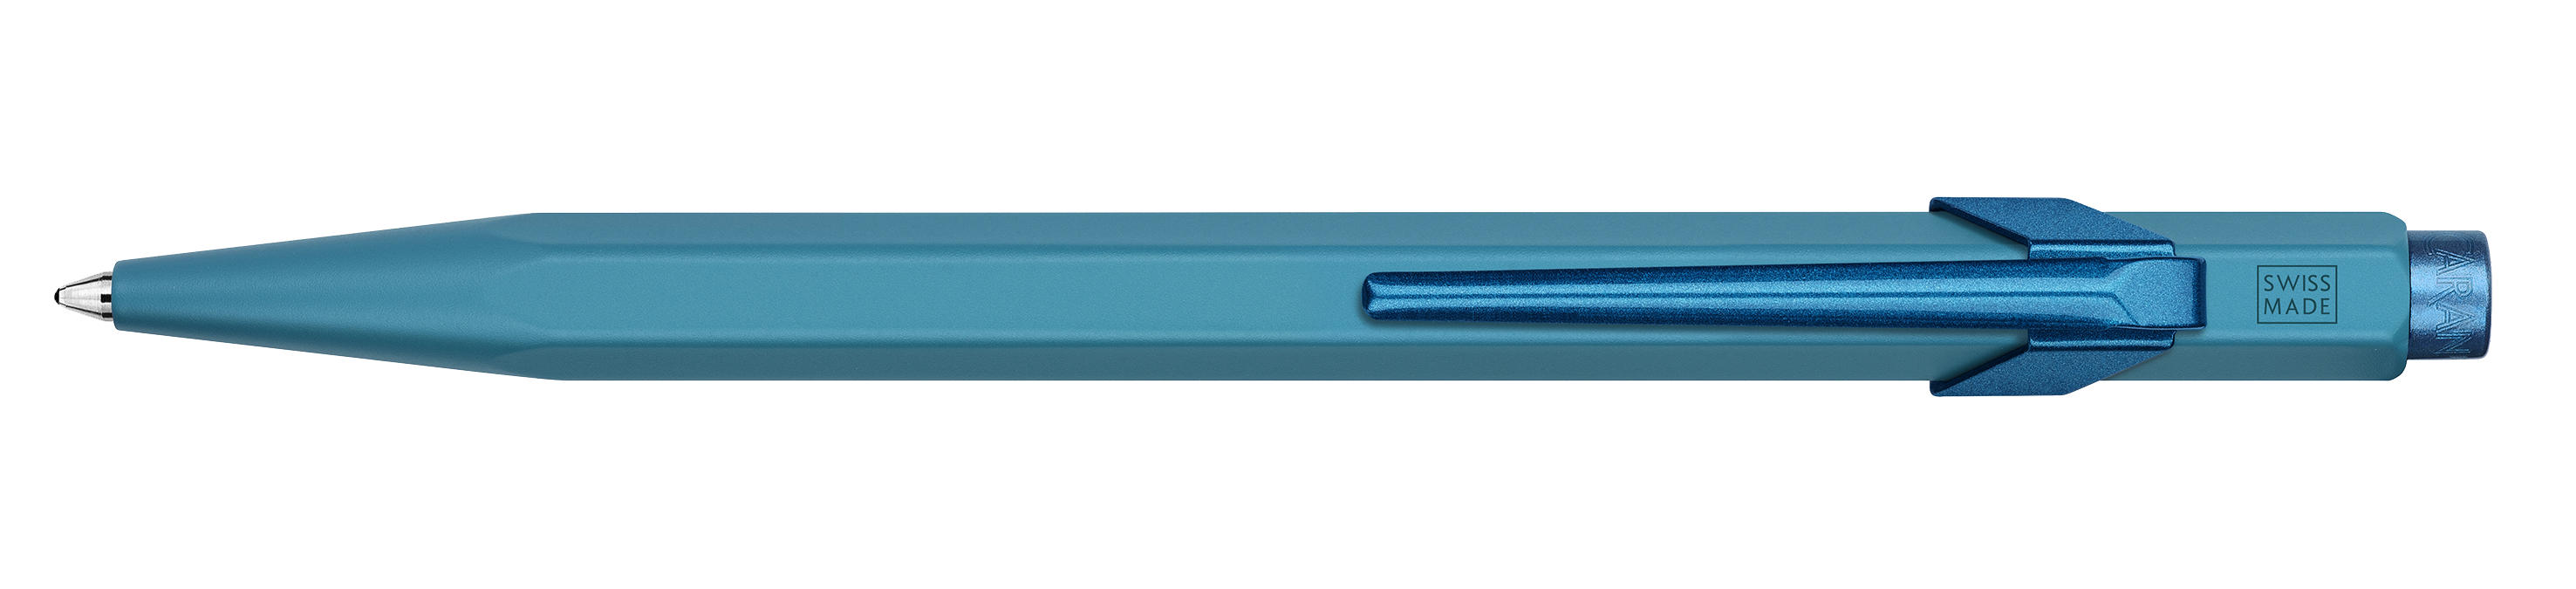 Caran d'Ache 849 Claim Your Style III Limited Edition Glacier Blue Ballpoint